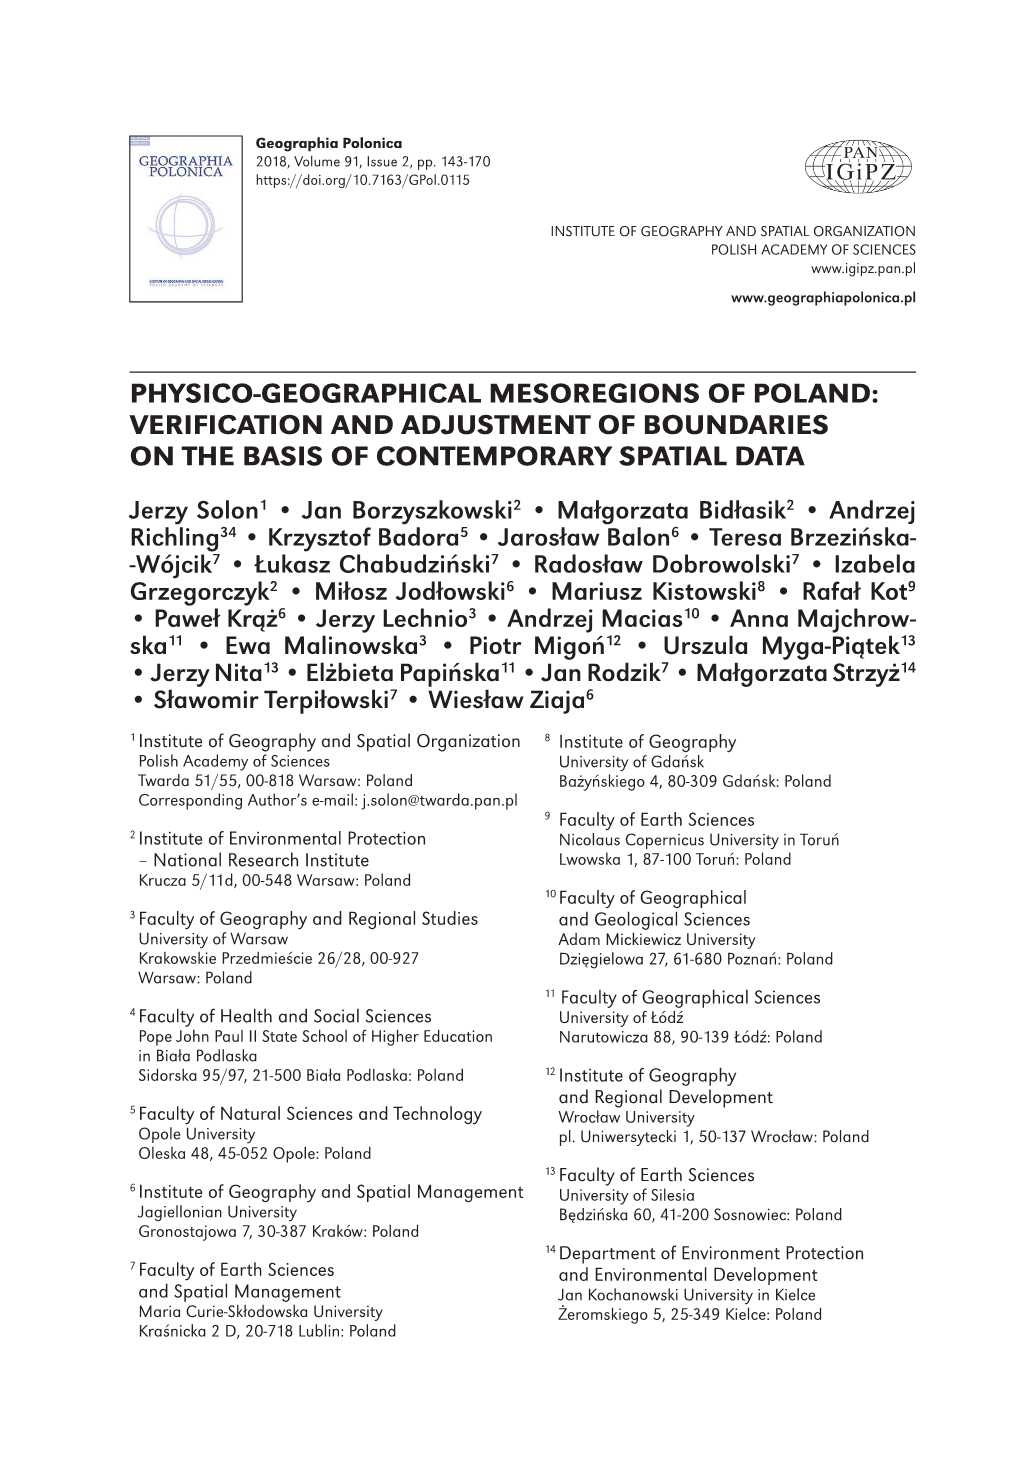 Physico-Geographical Mesoregions of Poland: Verification and Adjustment of Boundaries on the Basis of Contemporary Spatial Data